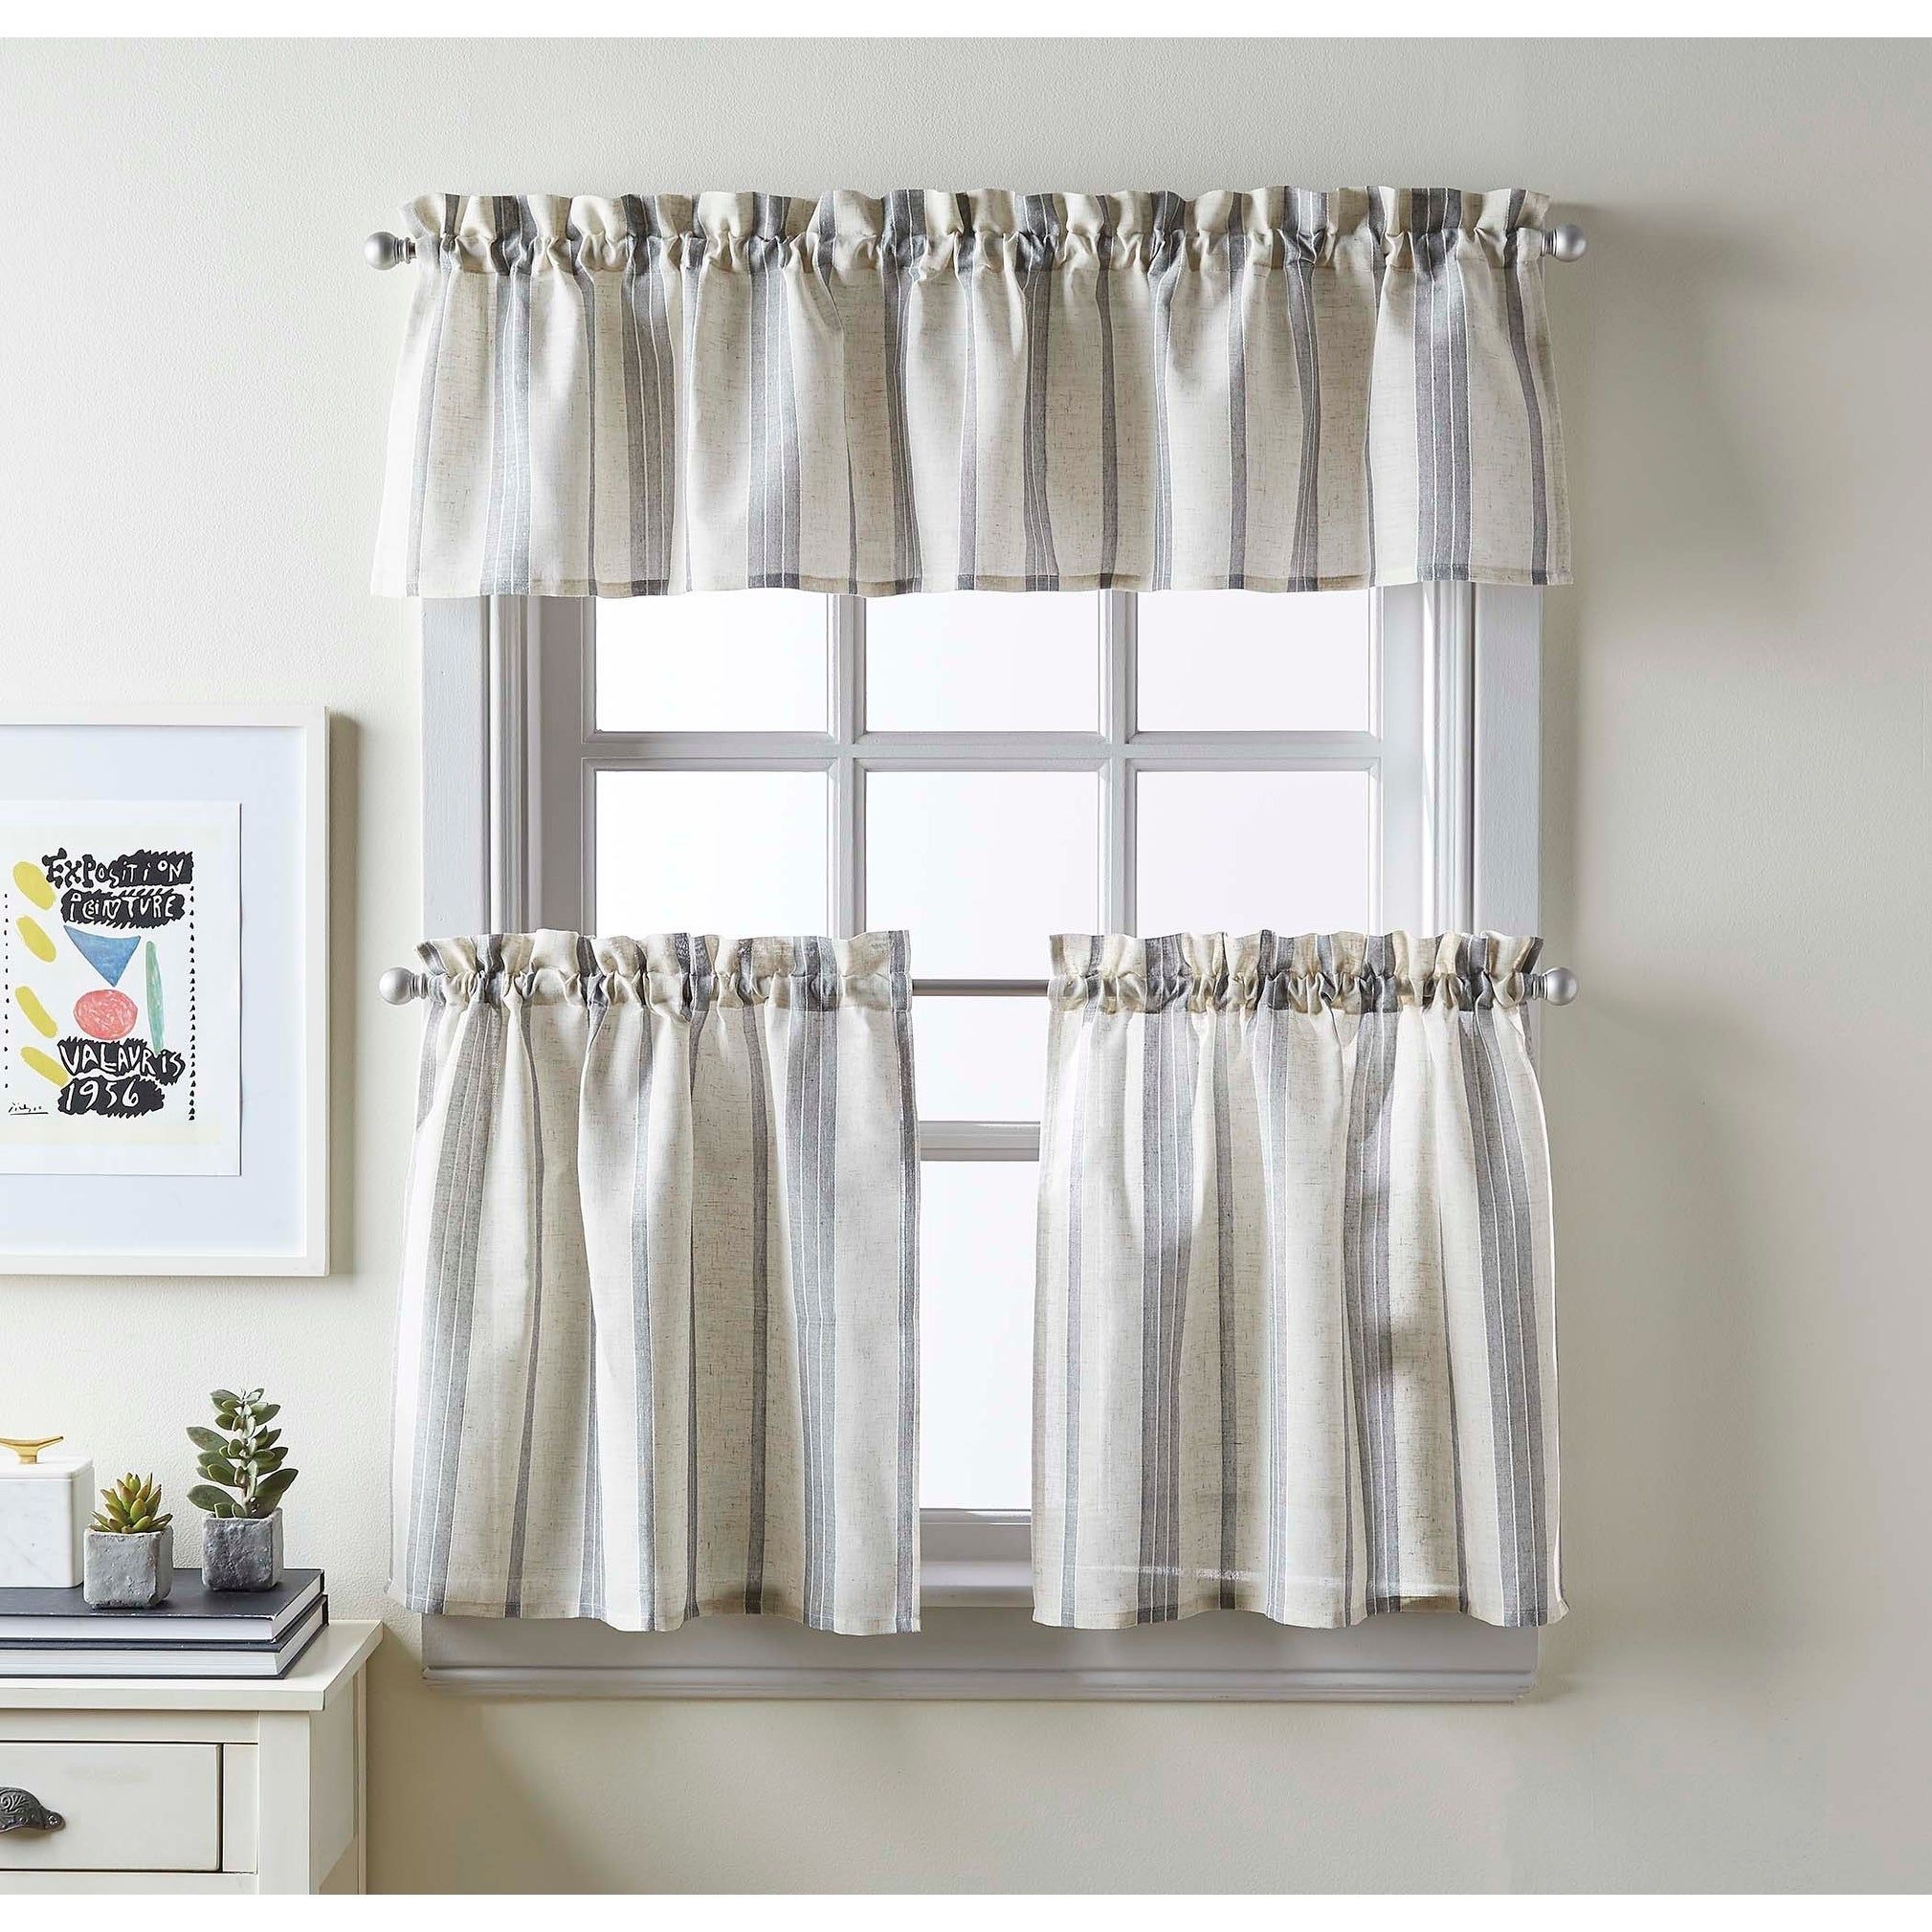 Mckenzie Valance And Tier Pair Curtain Collection Inside Lodge Plaid 3 Piece Kitchen Curtain Tier And Valance Sets (View 4 of 20)